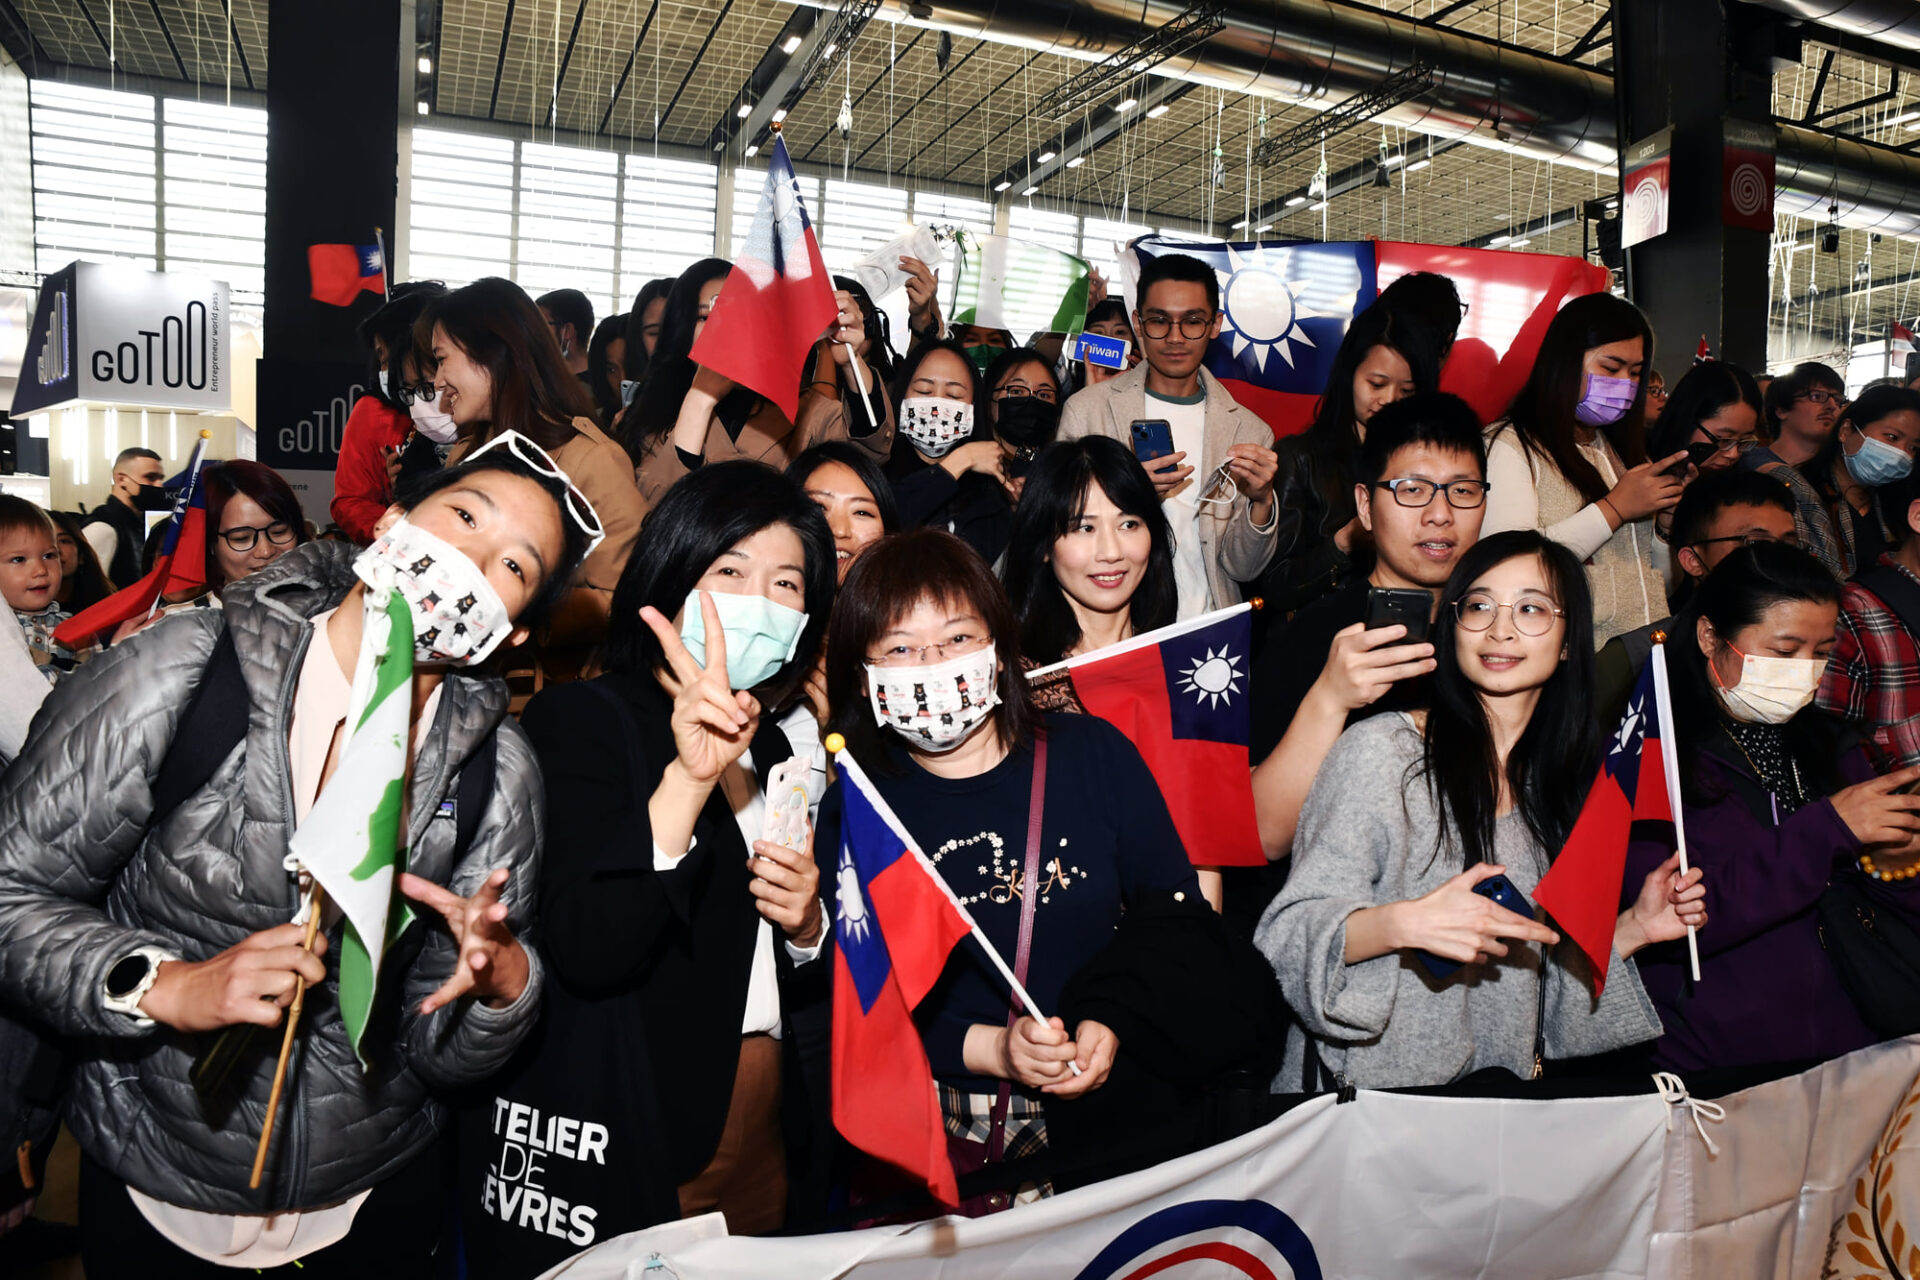 Fans celebrating at the Sirha Europain Coupe du Monde event